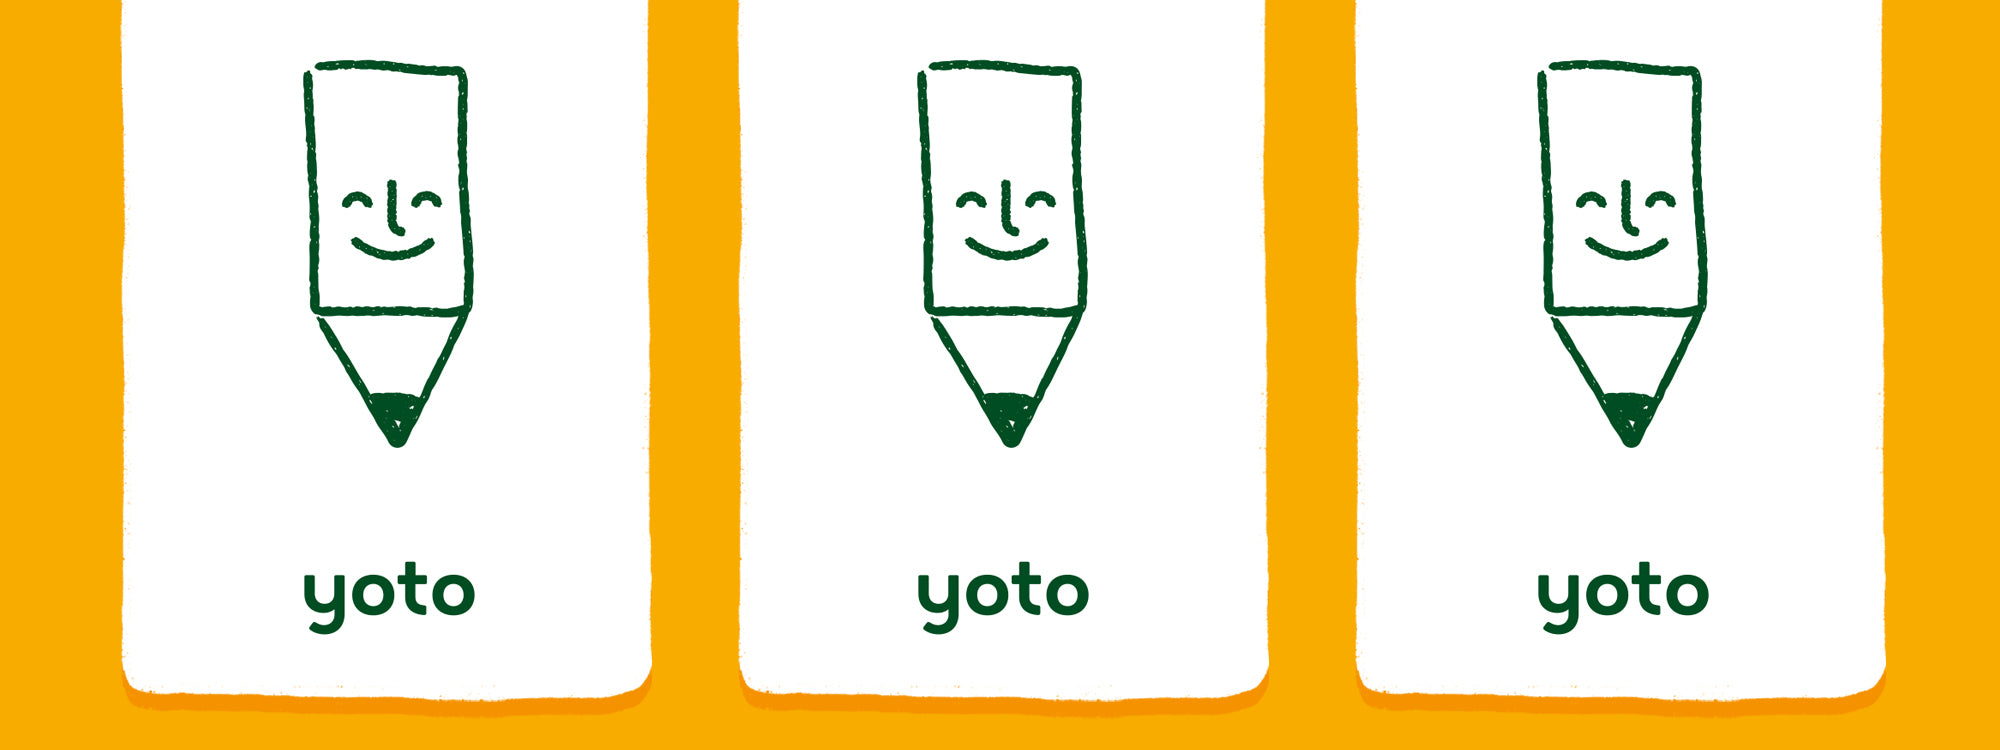 How to Make Your Own Yoto Cards